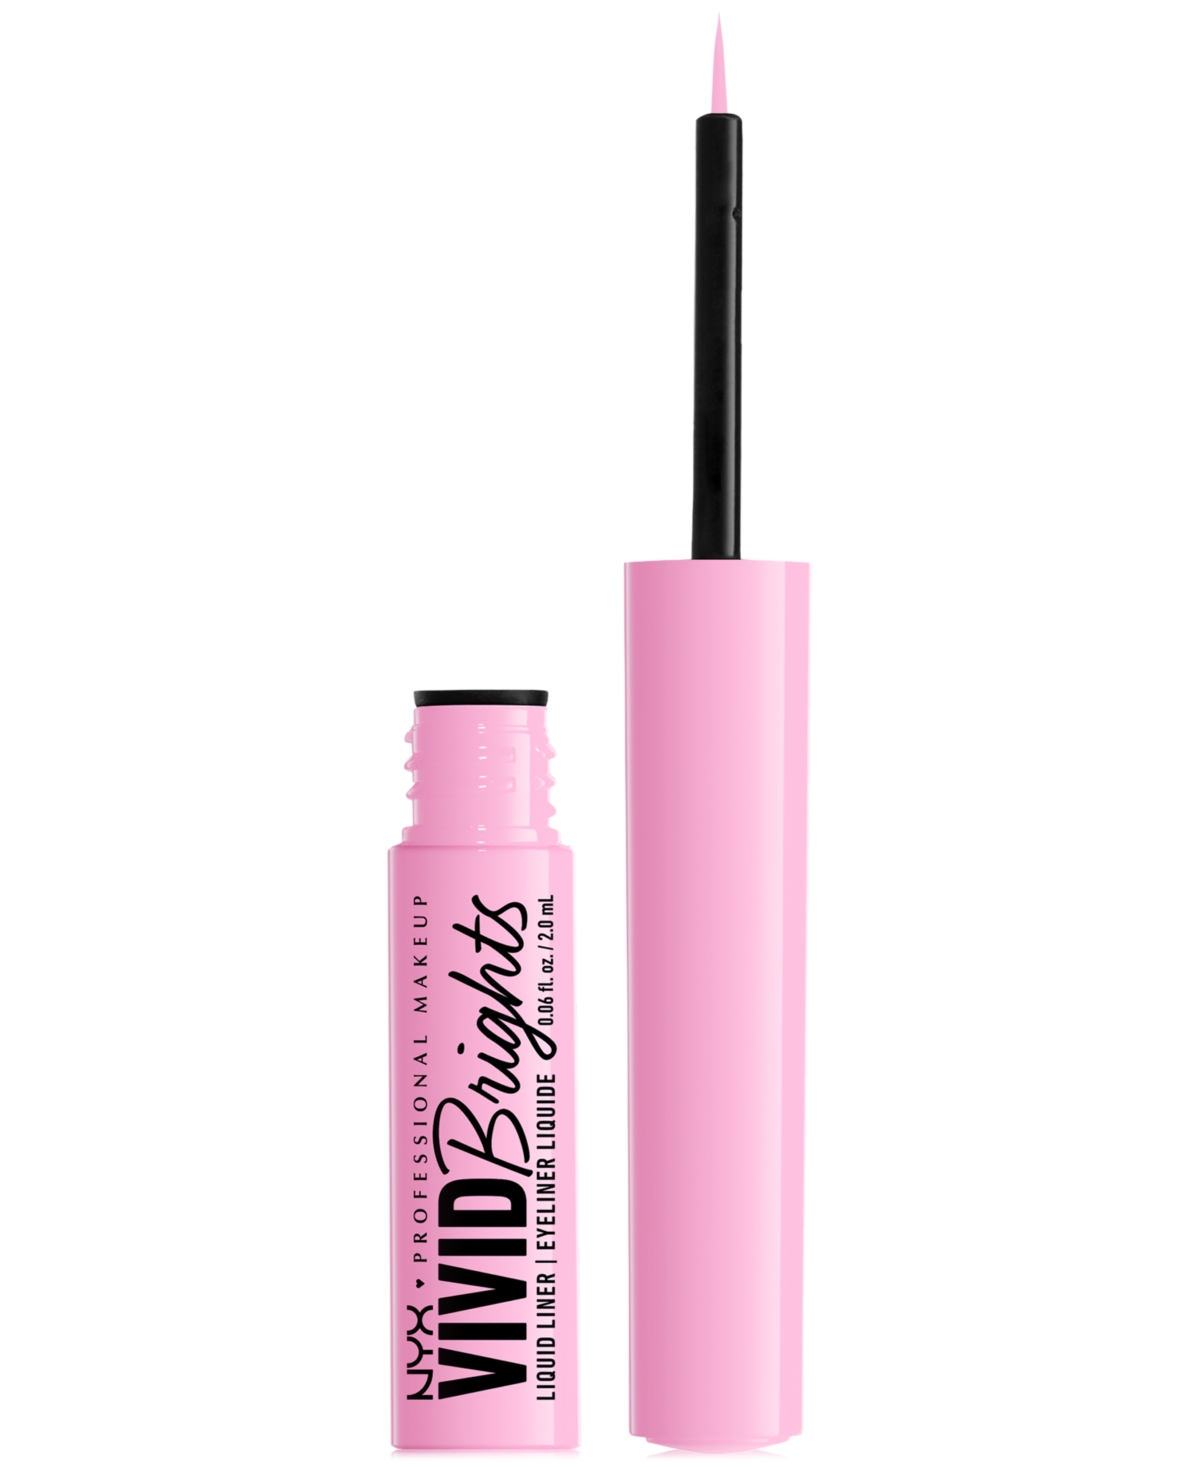 Nyx Professional Makeup Vivid Brights Liquid Liner In Sneaky Pink